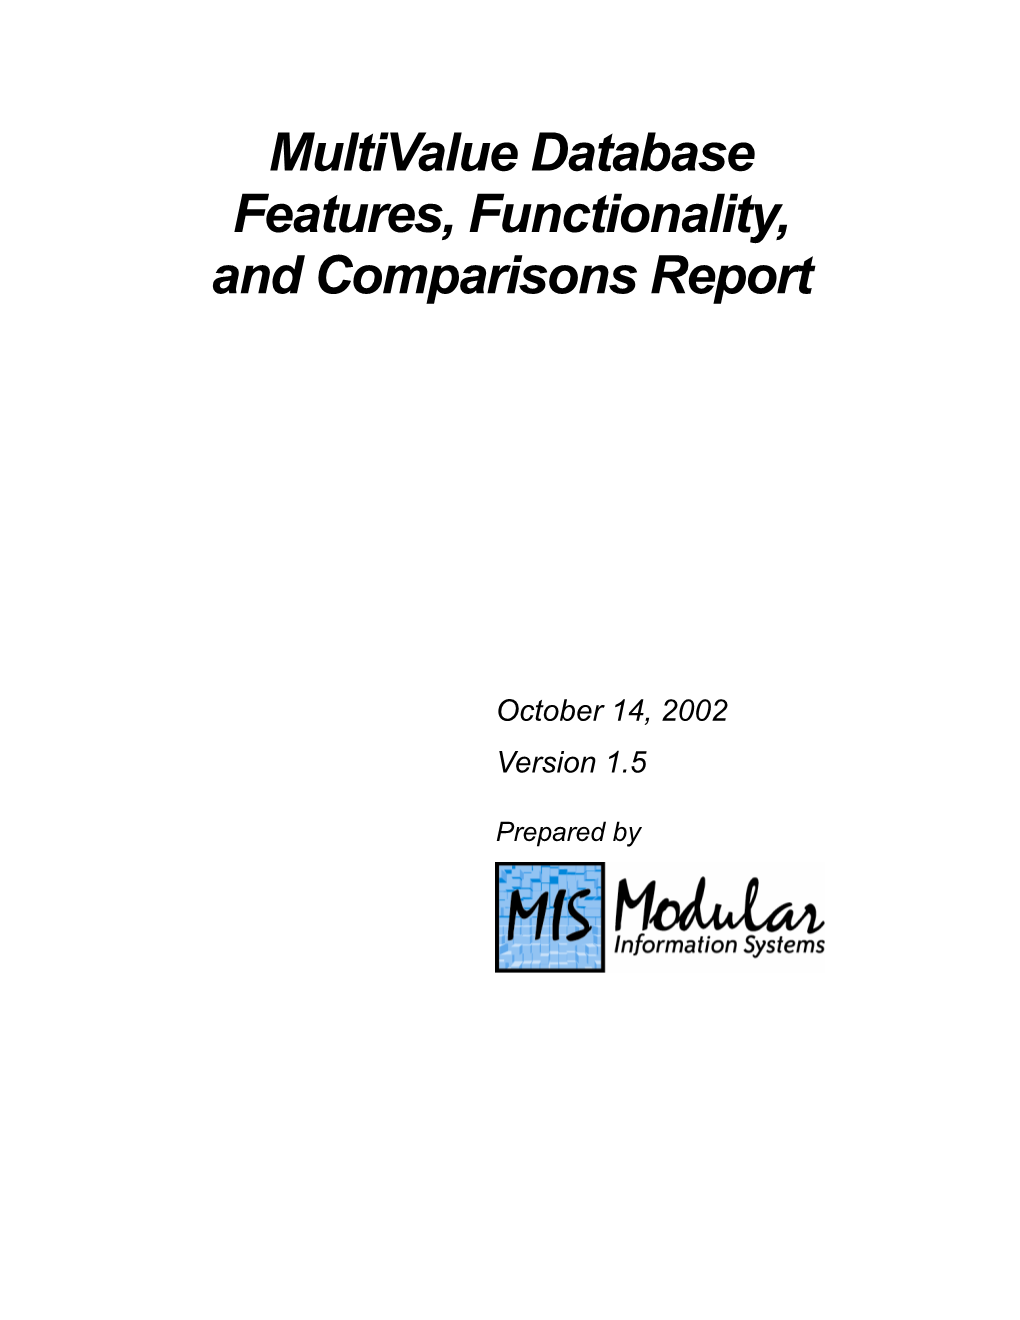 Multivalue Database Features, Functionality, and Comparisons Report